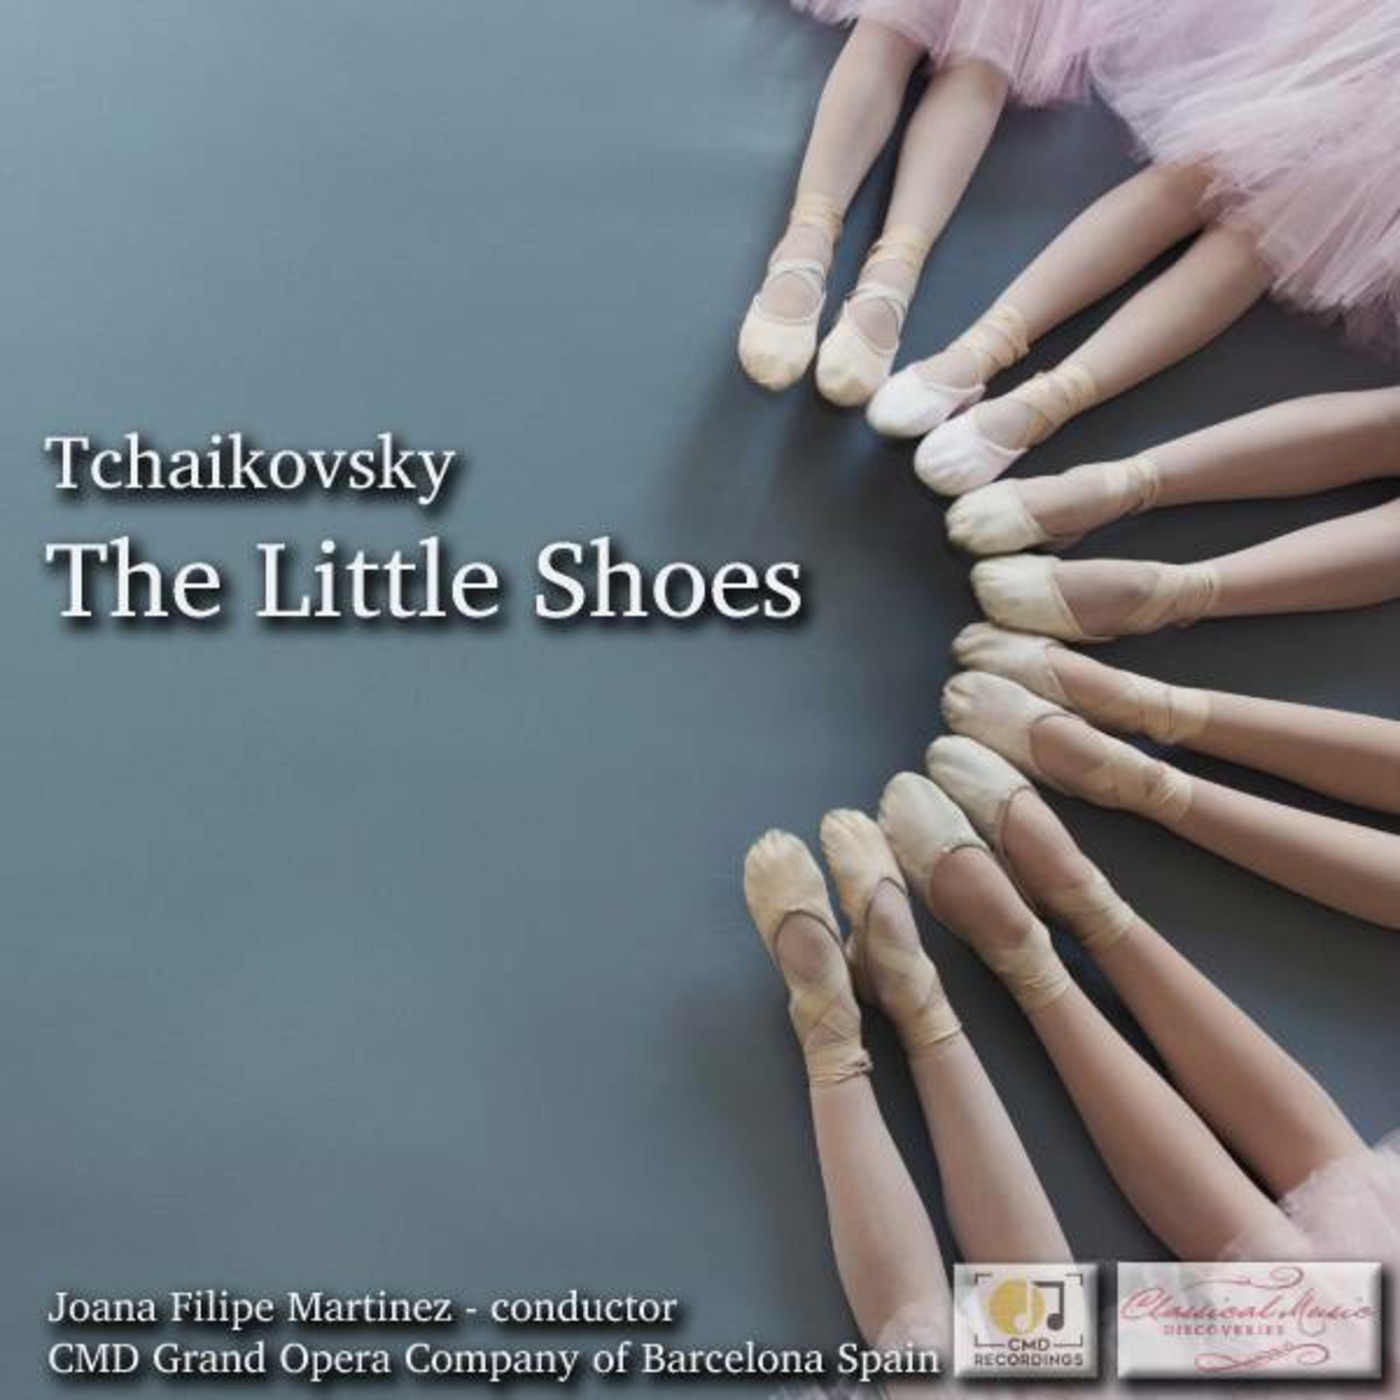 Episode 39: 18039 Tchaikovsky: The Little Shoes